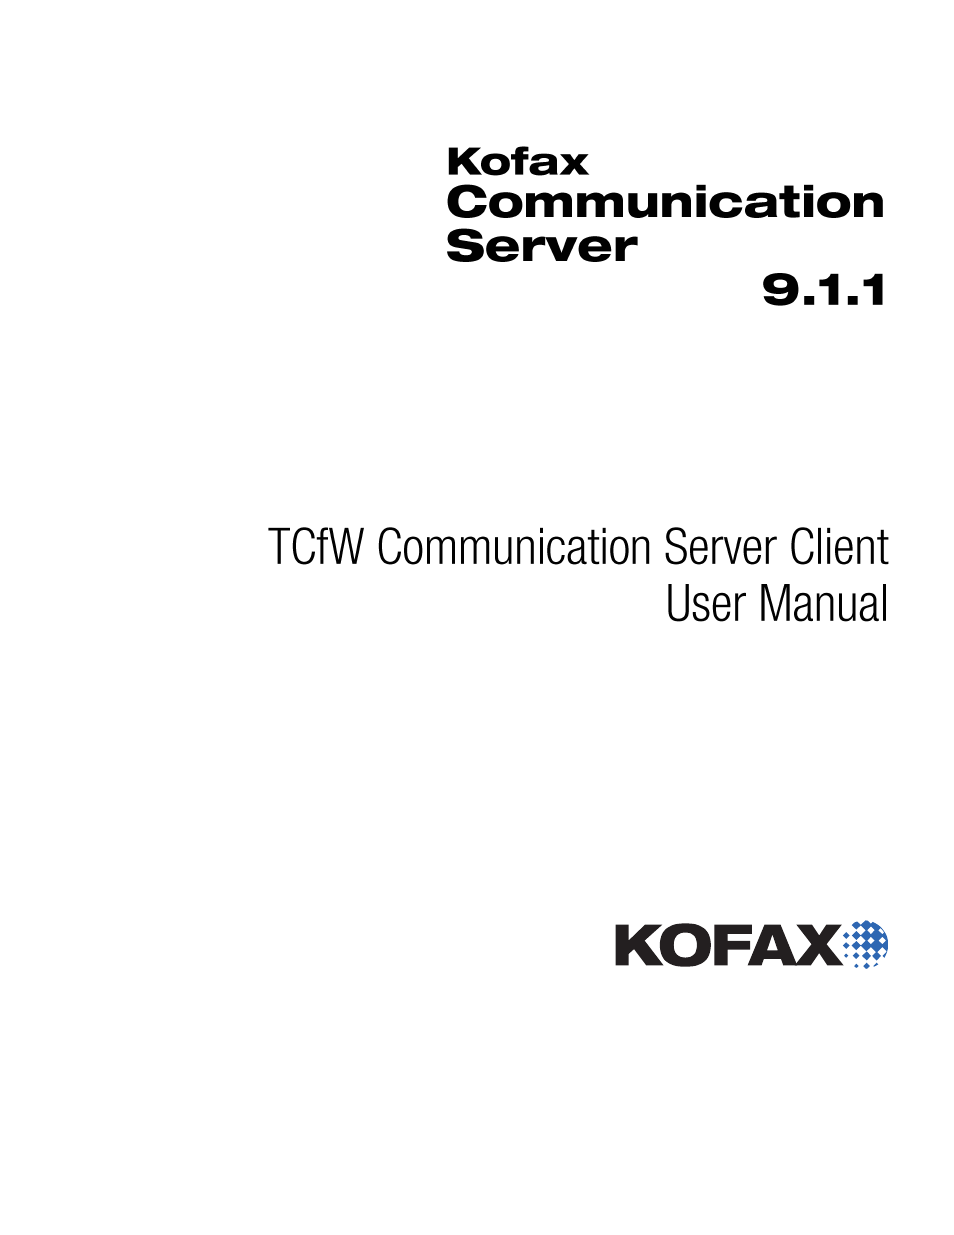 Kofax Communication Server 9.1.1 User Manual | 114 pages